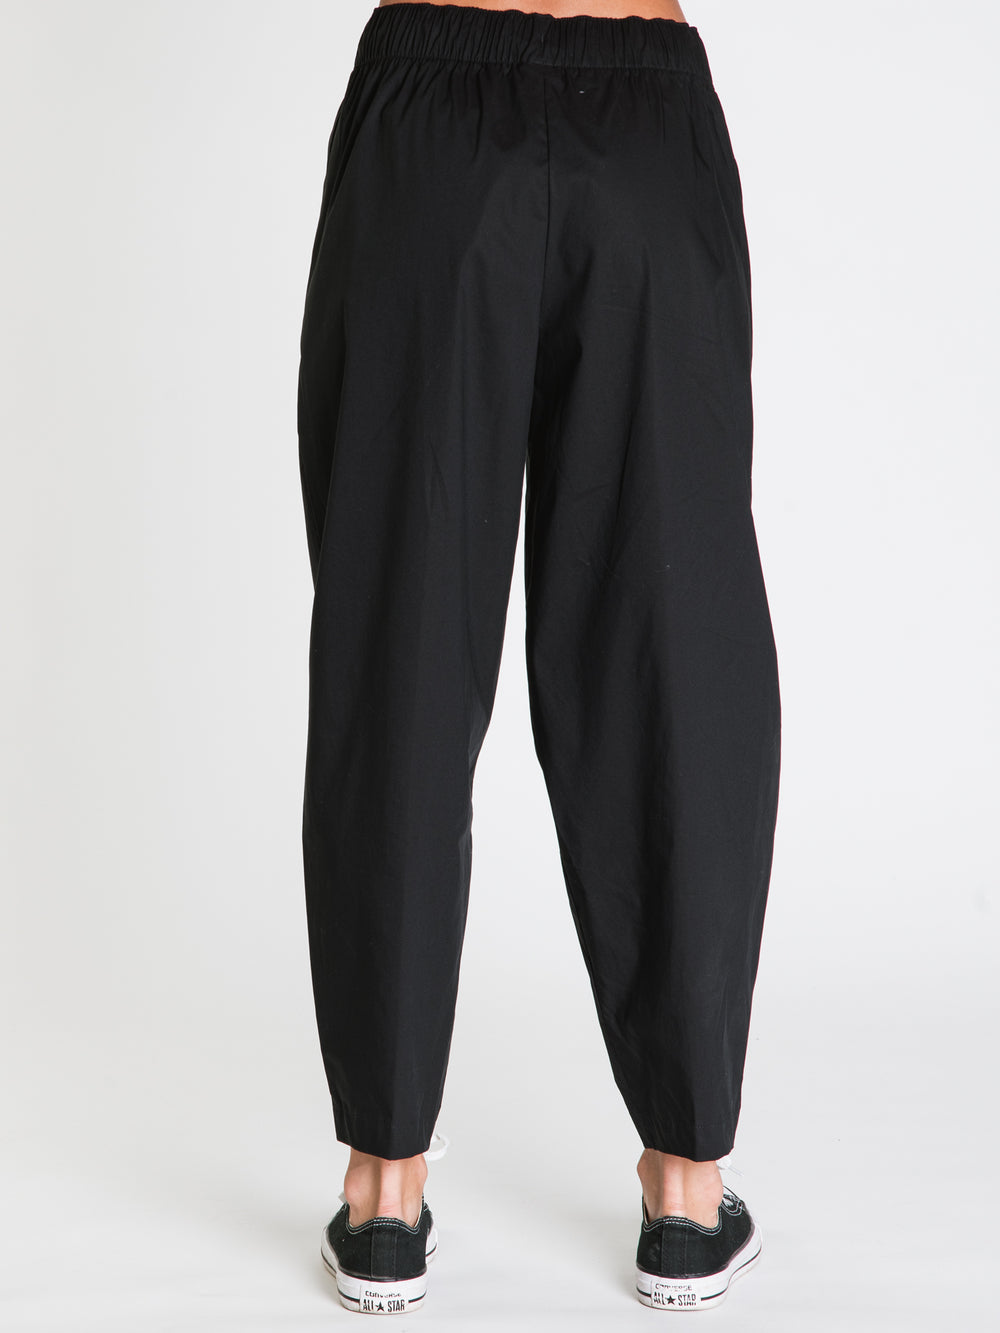 NIKE ESSENTIALS STRETCH WOVEN PANT  - CLEARANCE